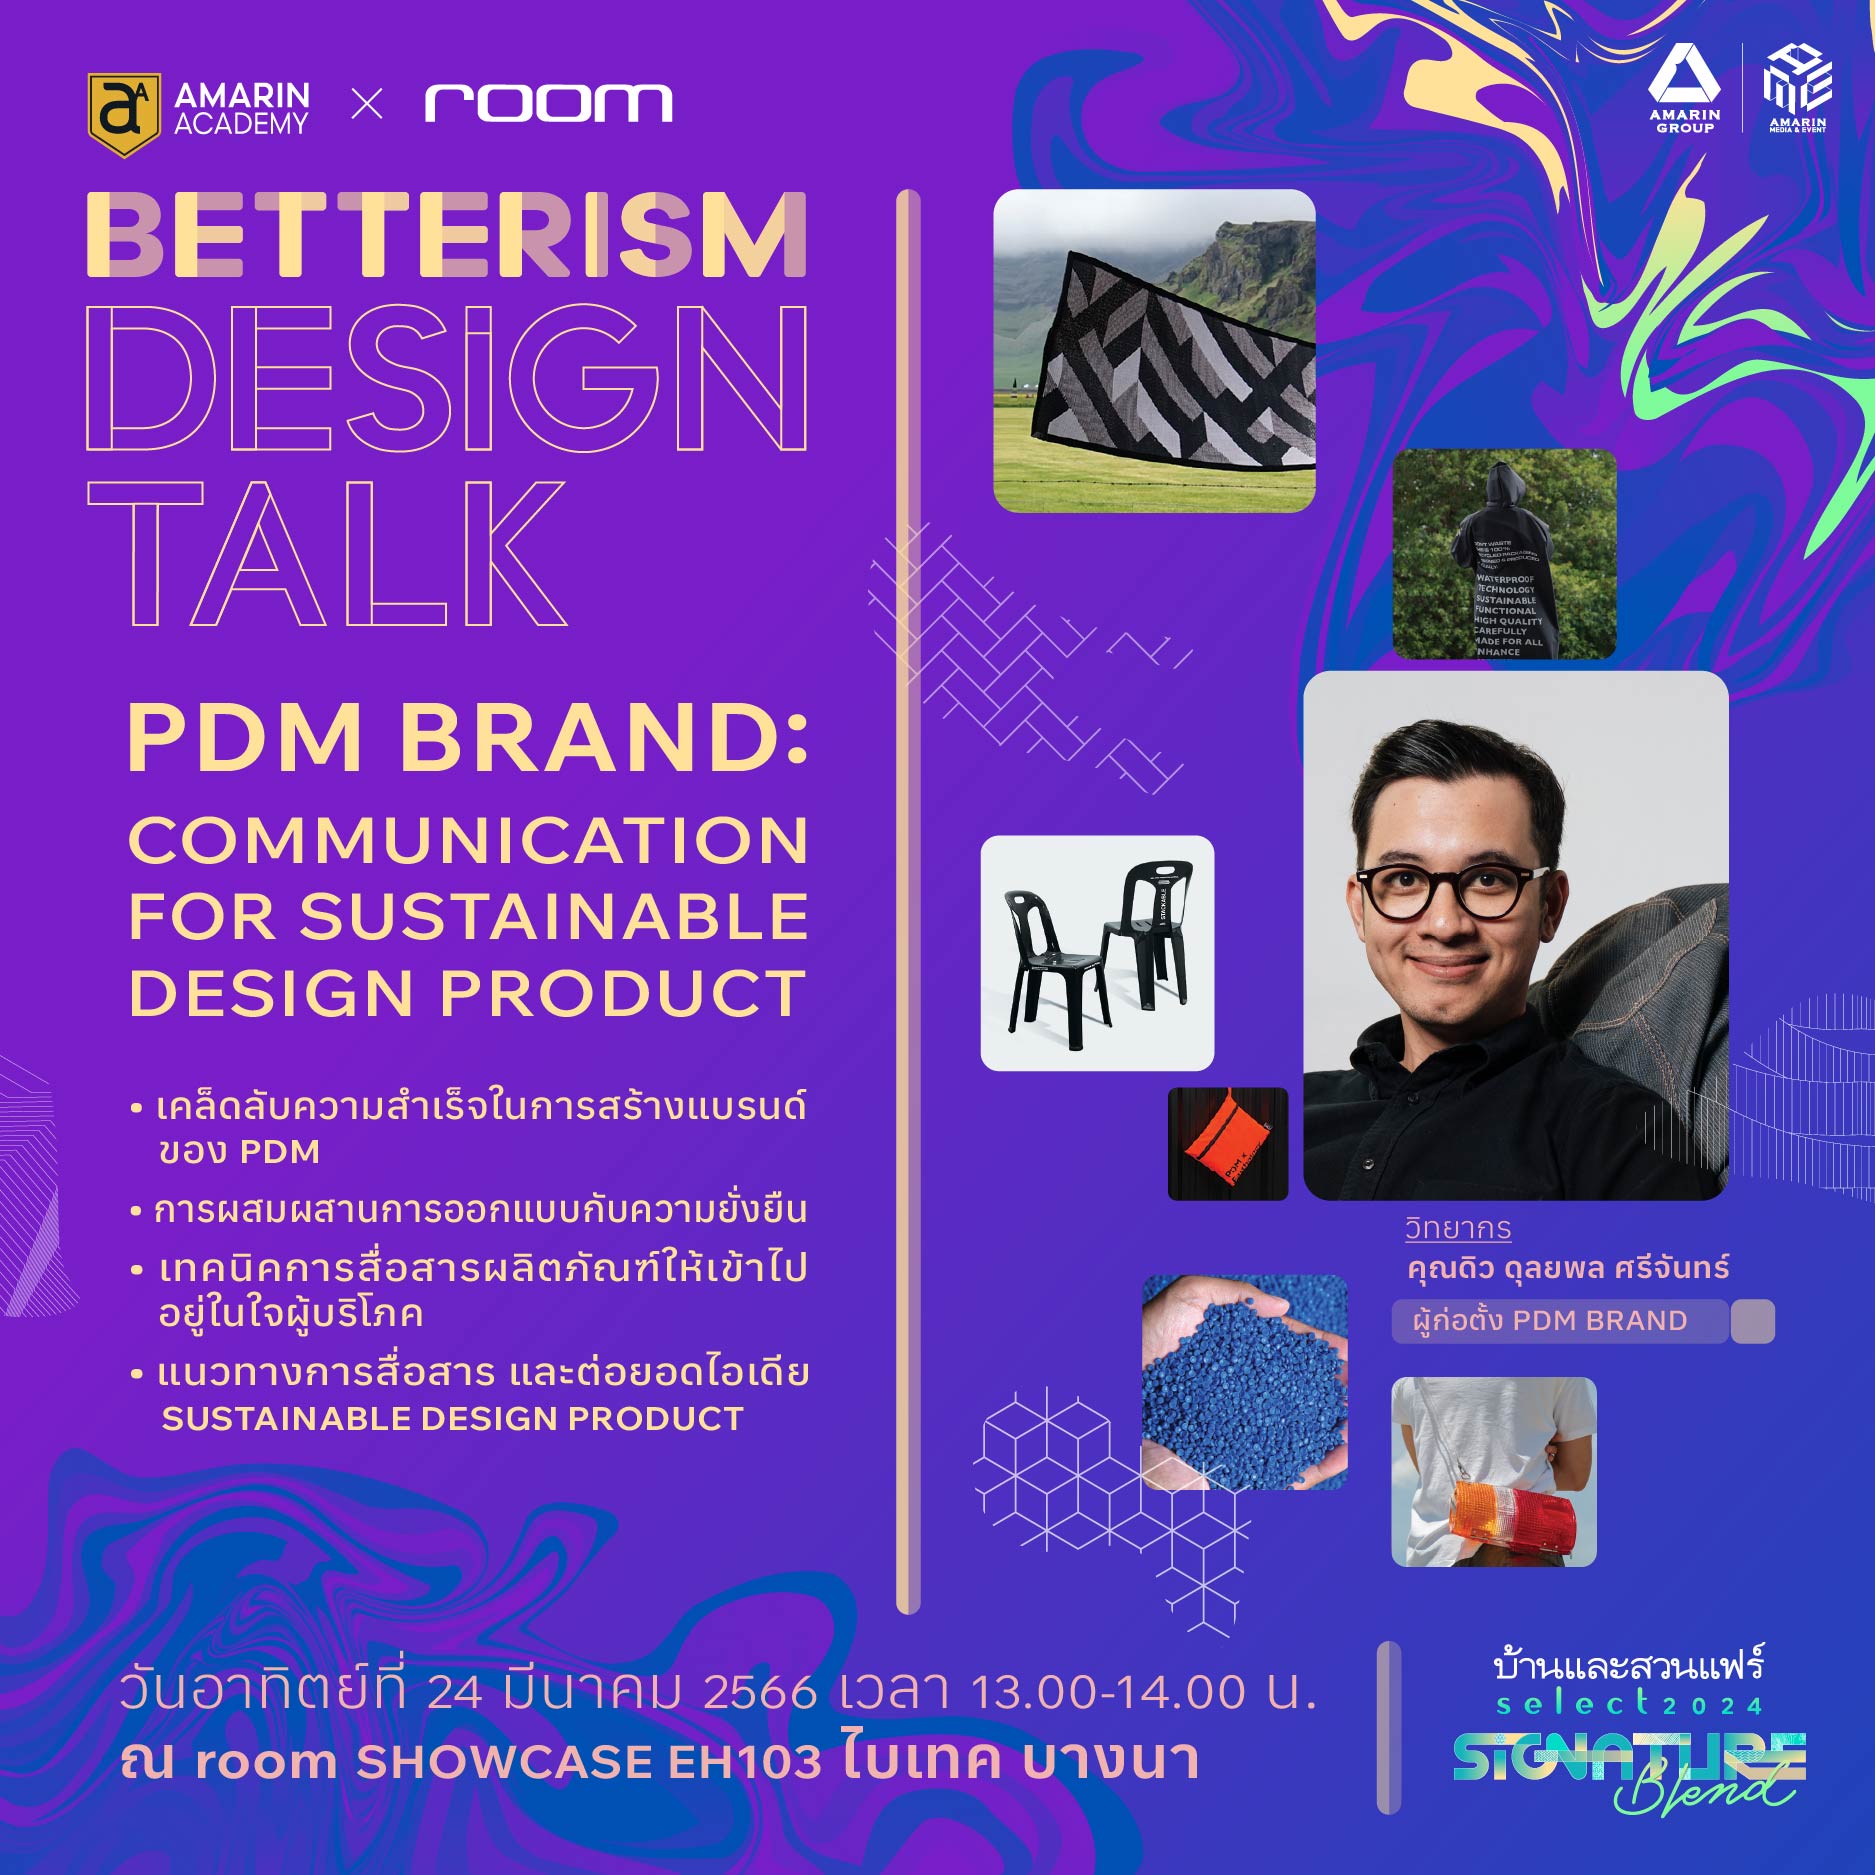 BETTERRISM DESIGN TALK  PDM BRAND : Communication for Sustainable Design Product